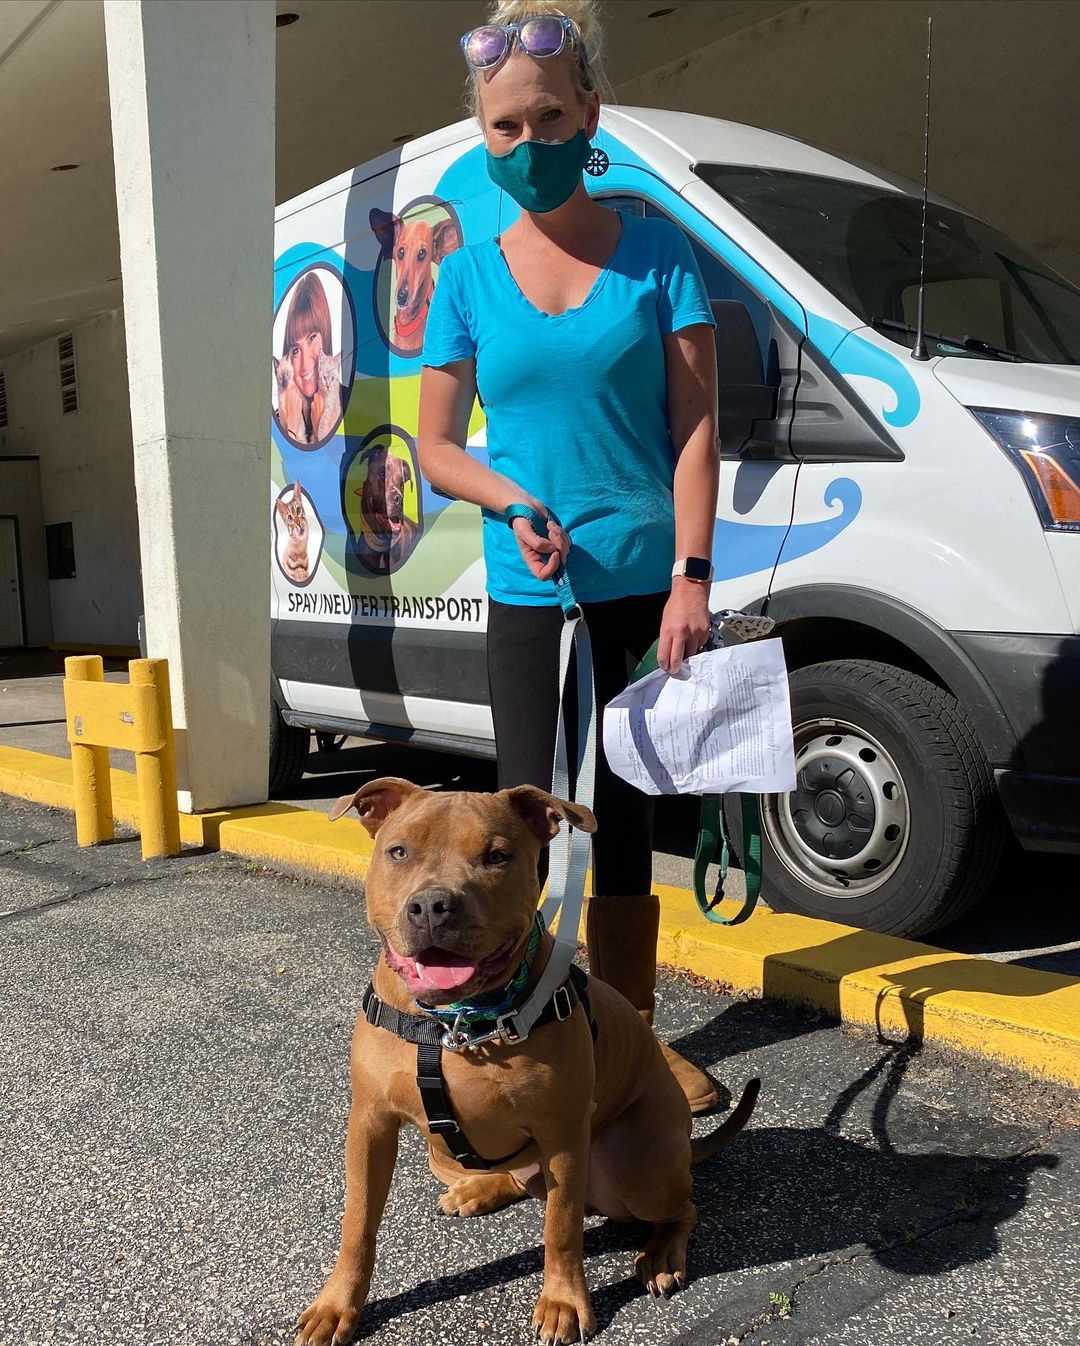 We had a nice turn out to yesterday’s Healthy Pets For All - a free wellness pop up clinic in Felton.

Thank you to Mountain Community Resources @puentes_sc 🙏 for allowing us to use their premises and to spread the word to the local <a target='_blank' href='https://www.instagram.com/explore/tags/community/'>#community</a> of our free service. Also thank you to the veterinarian, RVT and volunteers who came to help🙏

We were happy to assist the SLV residents by providing care to their pets. Check out some of the amazing humans and their just as amazing pets we served!

Stay tuned to more Healthy Pets For All dates in 2022!

For more information on services we offer go to our website (link in Bio).